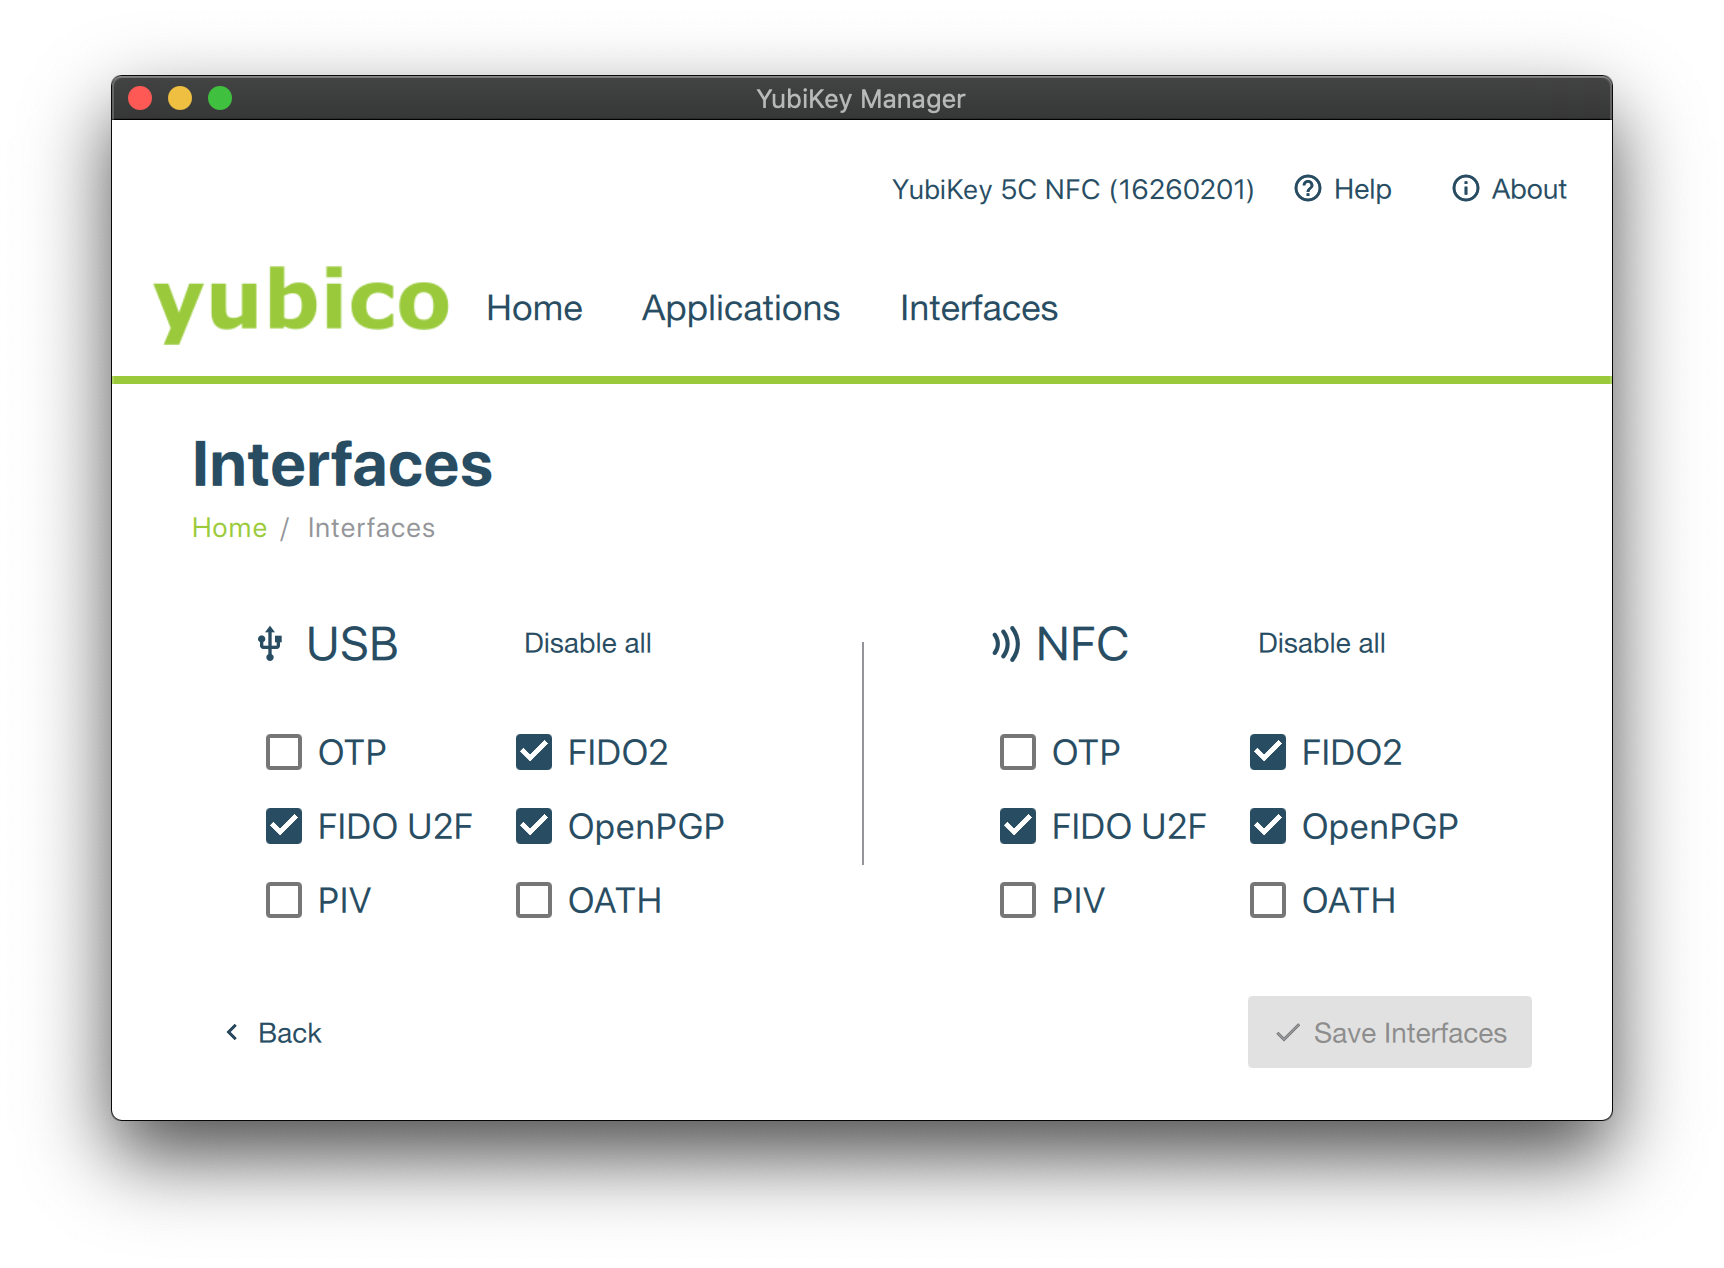 Enabled YubiKey Interfaces